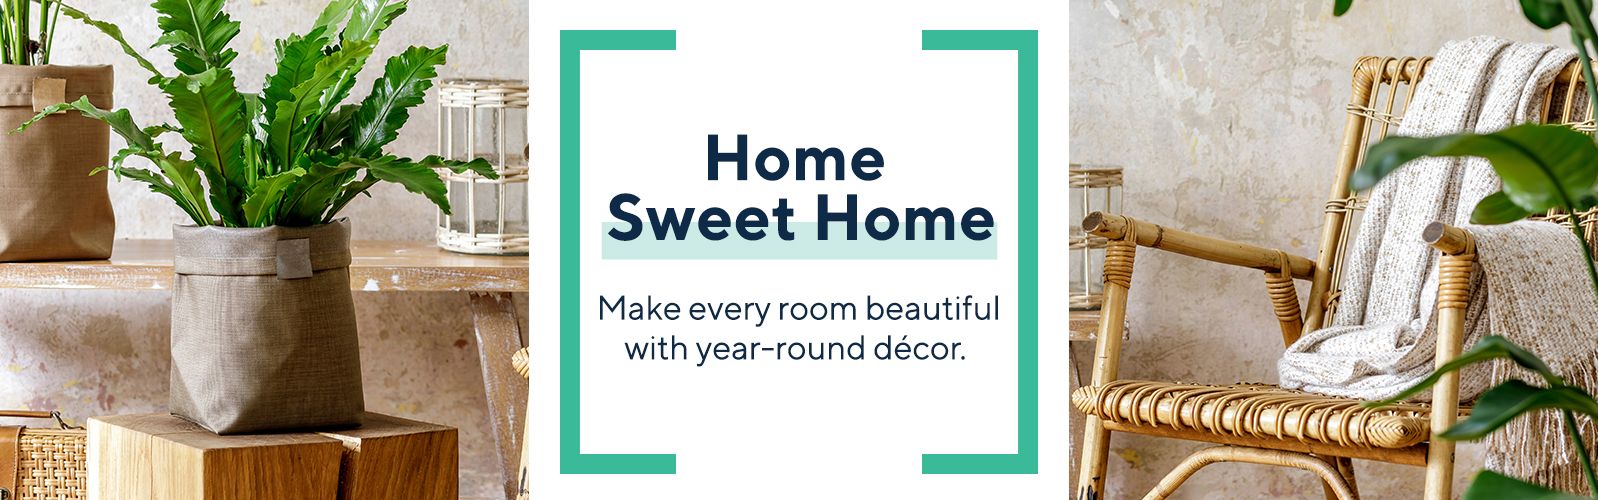 Home Sweet Home Make every room beautiful with year-round décor. 